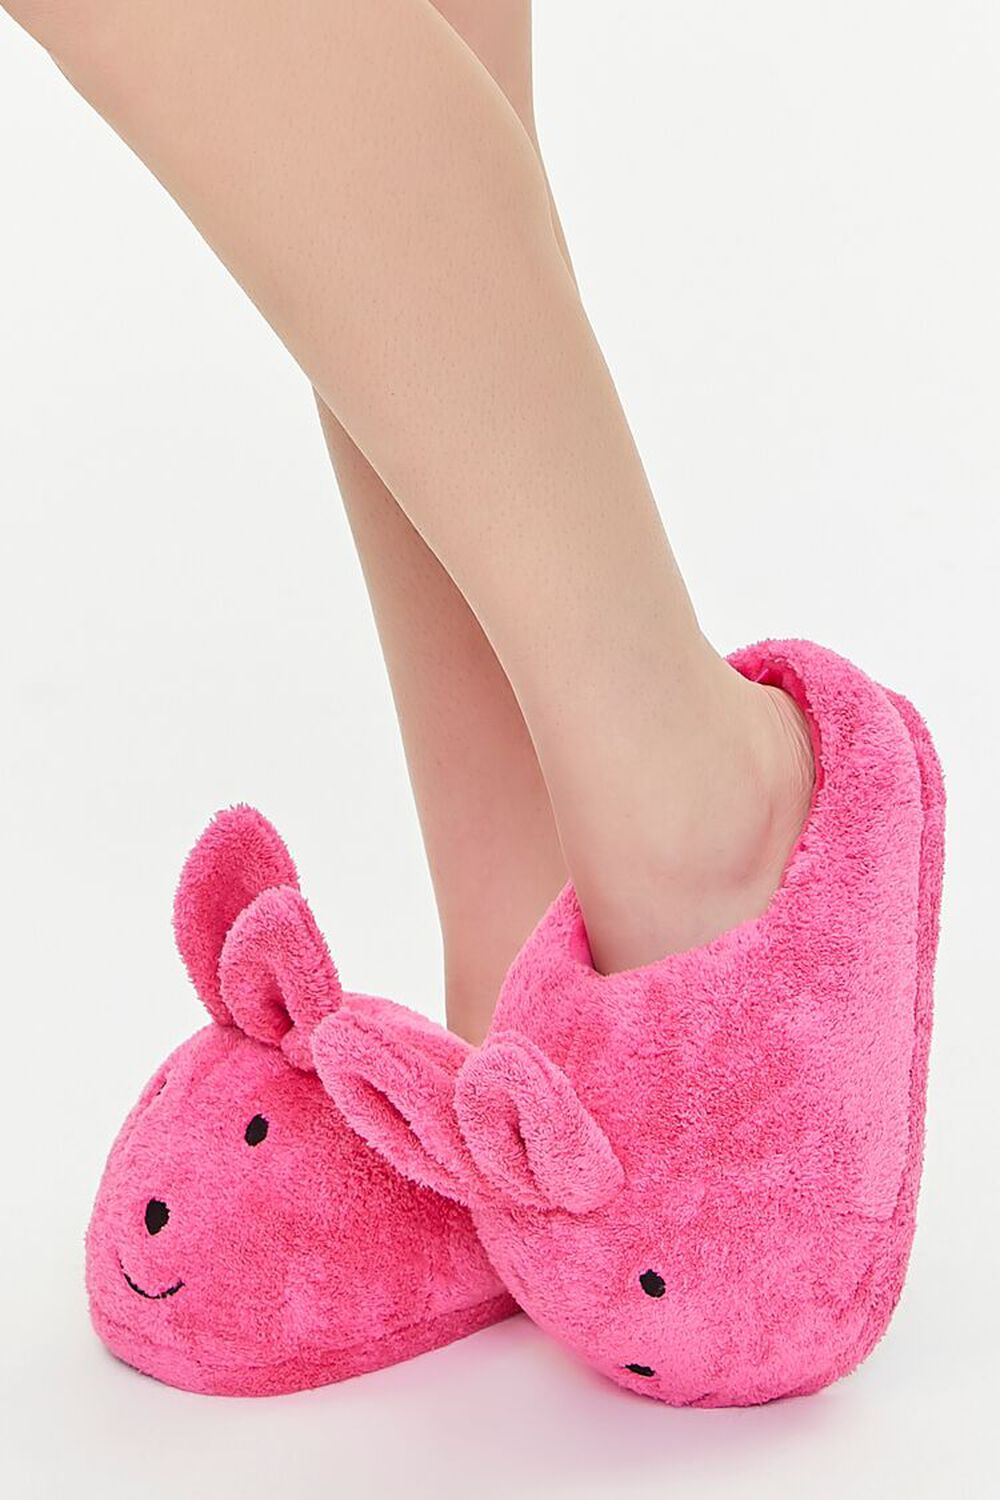 PINK Plush Bunny Indoor Slippers, image 1